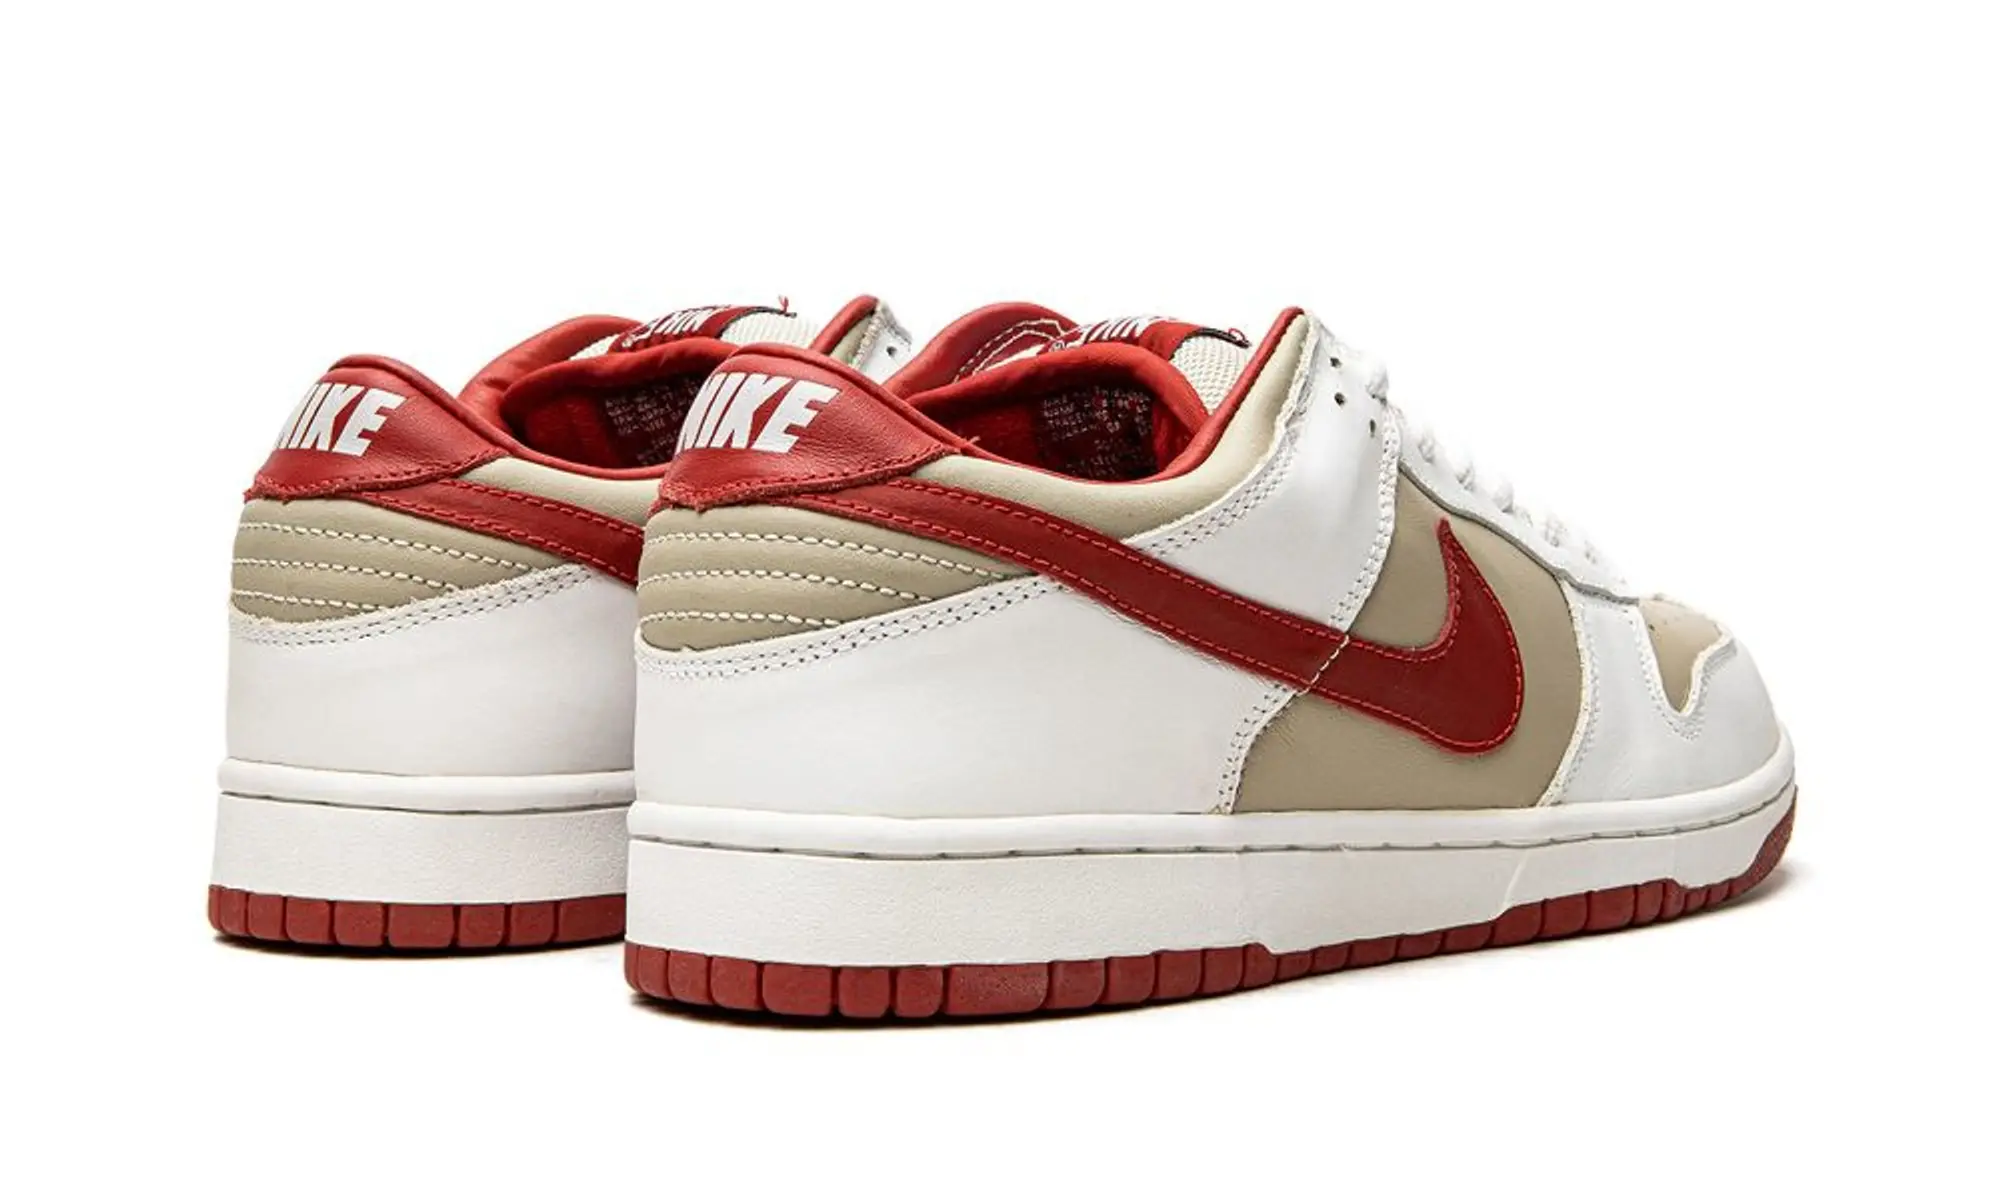 Nike Womens Dunk Low Pro Light Stone Varsity Red Shoes